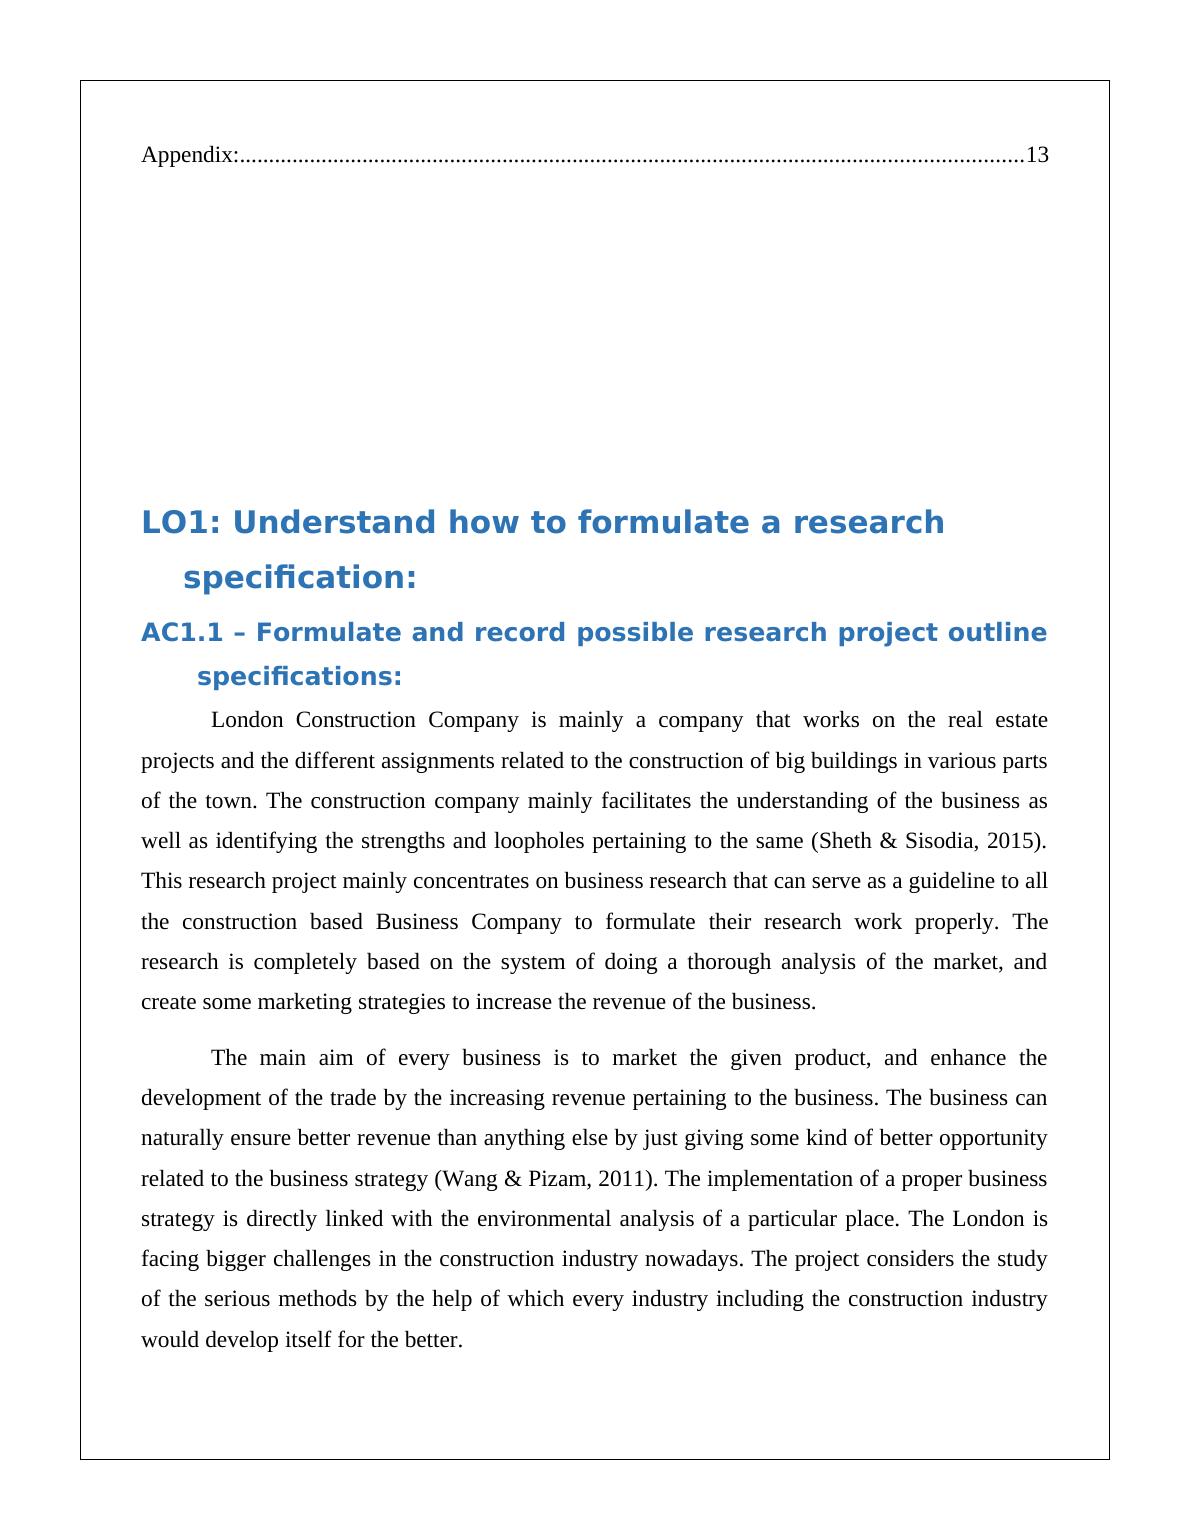 LO1: Formulation and Implementation of the Research Project 6_2